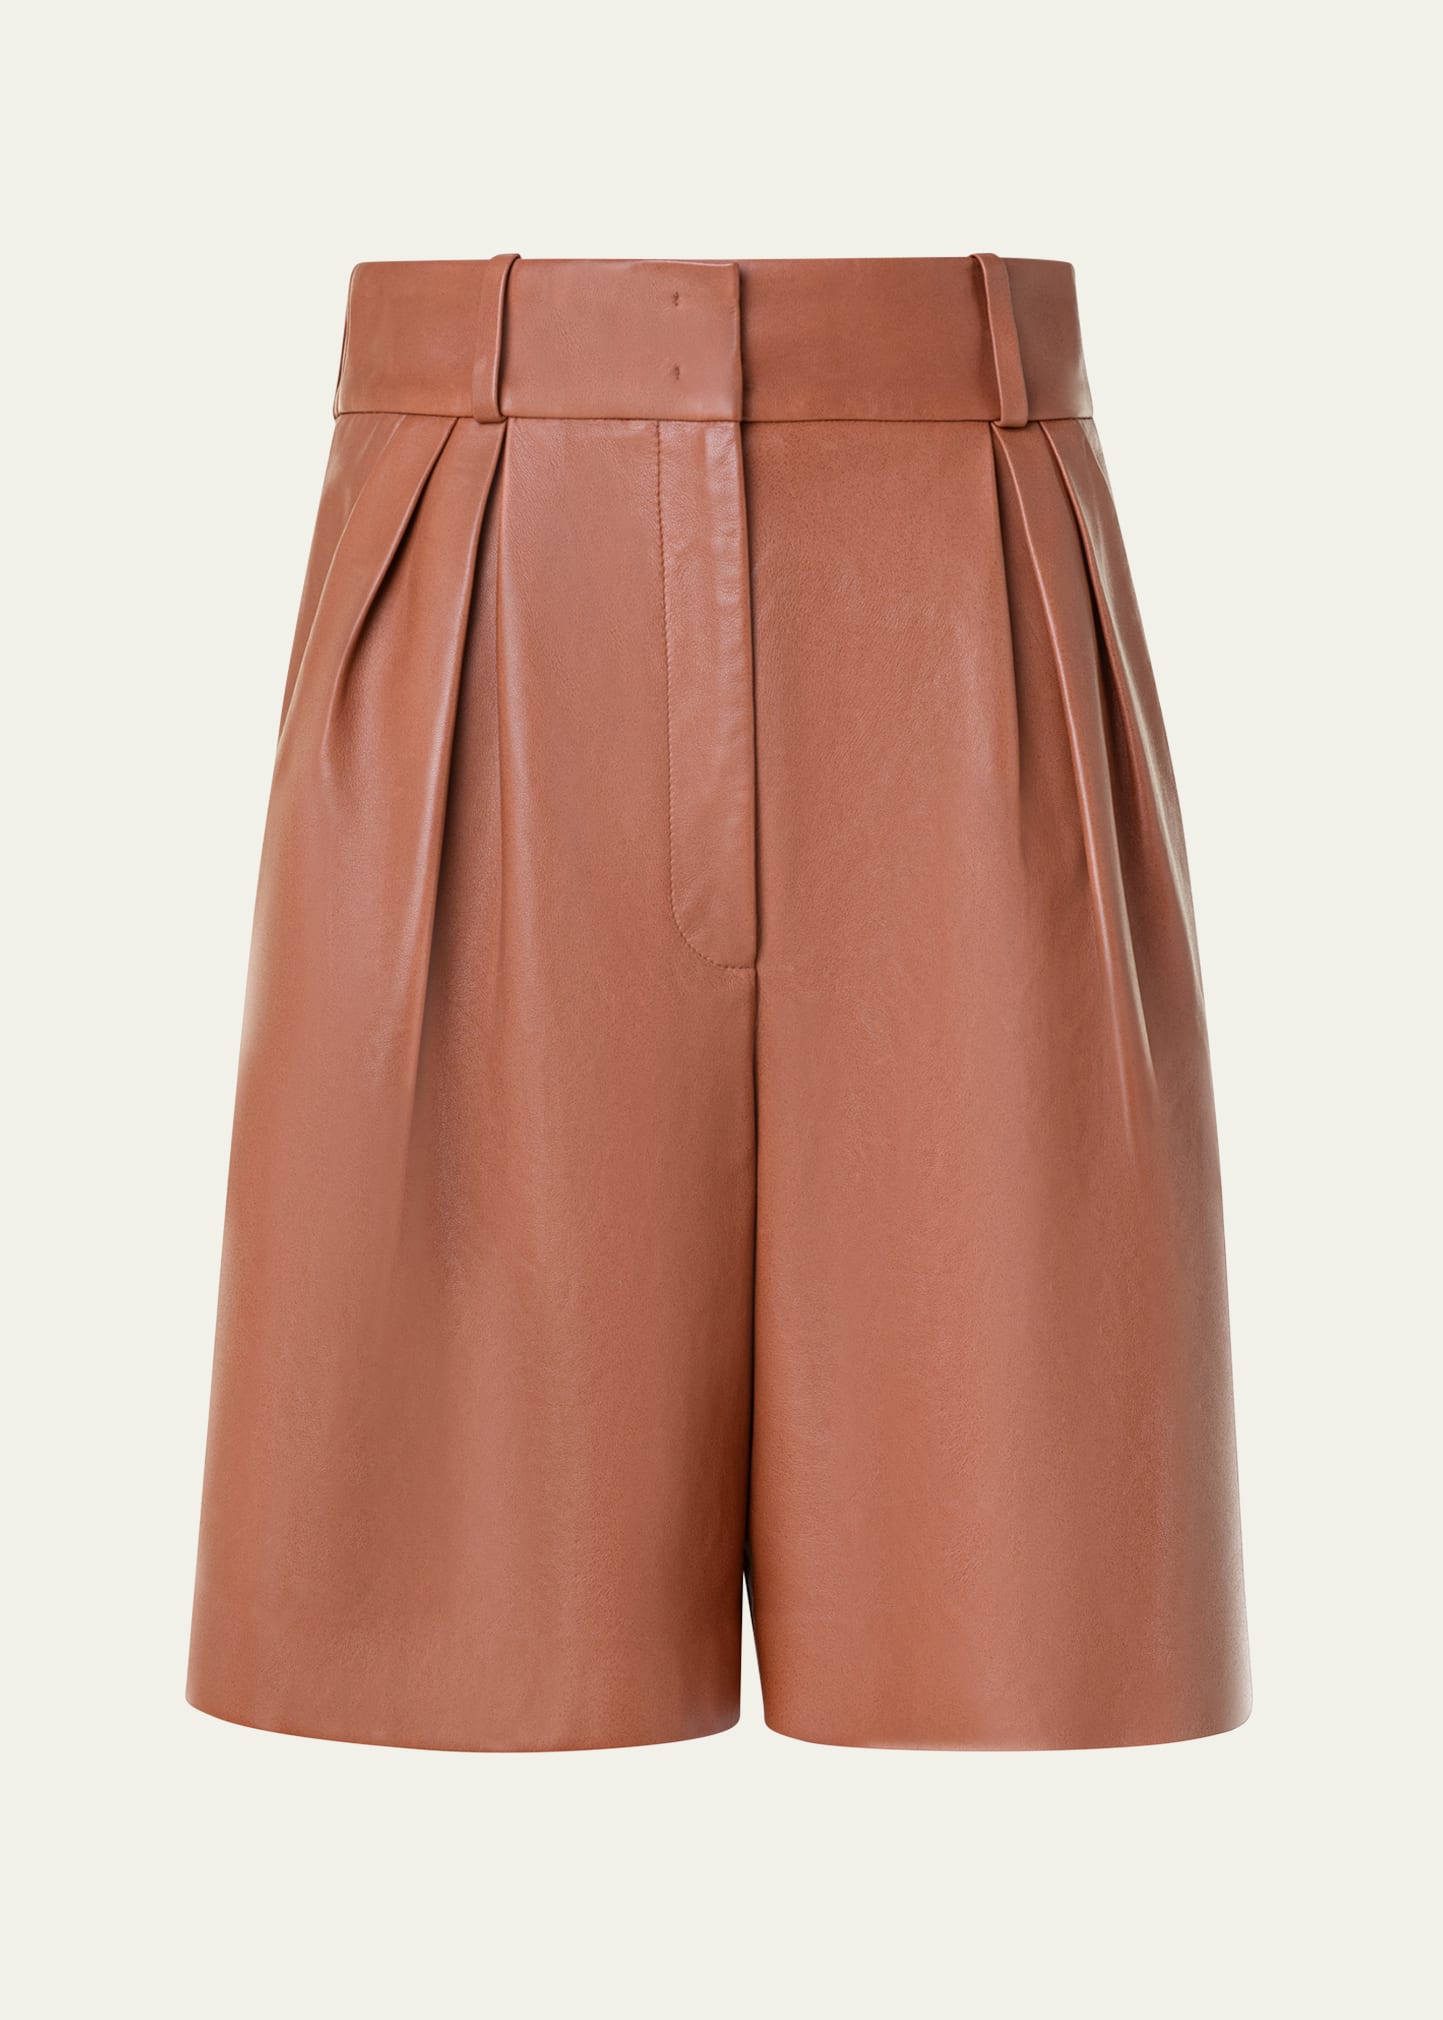 Finnick Pleated Leather Bermuda Shorts